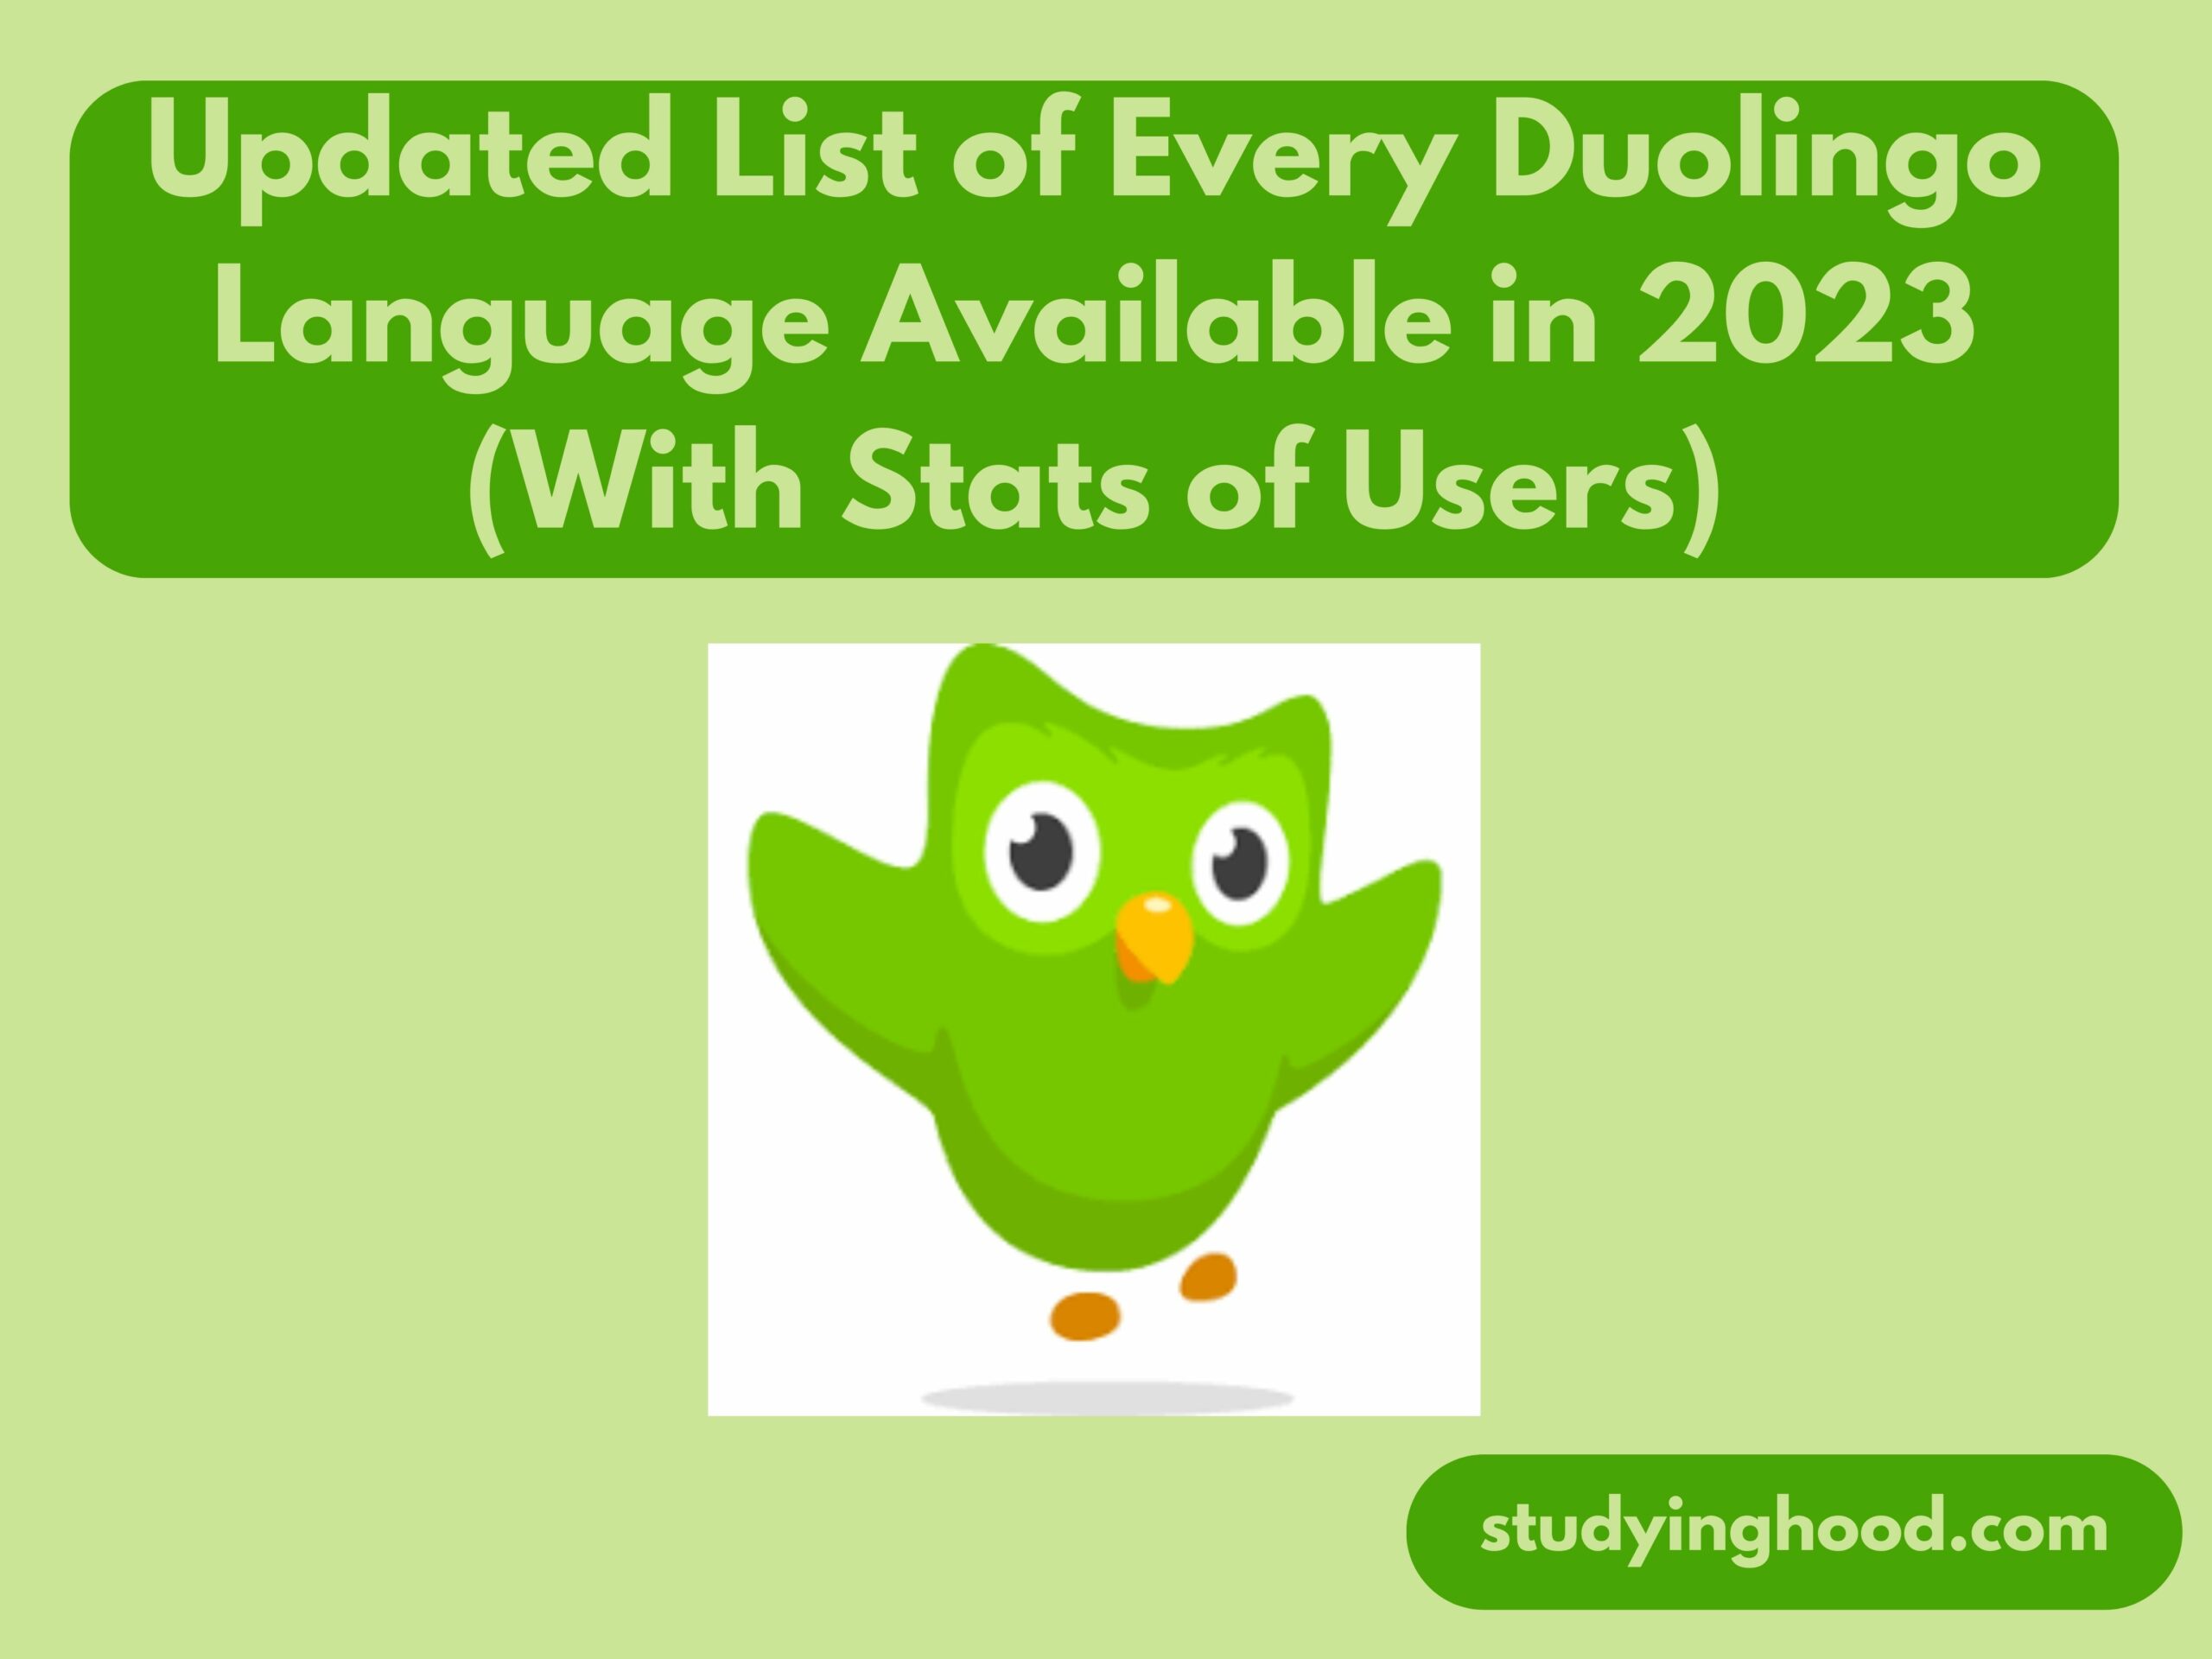 Updated List of Every Duolingo Language Available in 2023 (With Stats of Users)